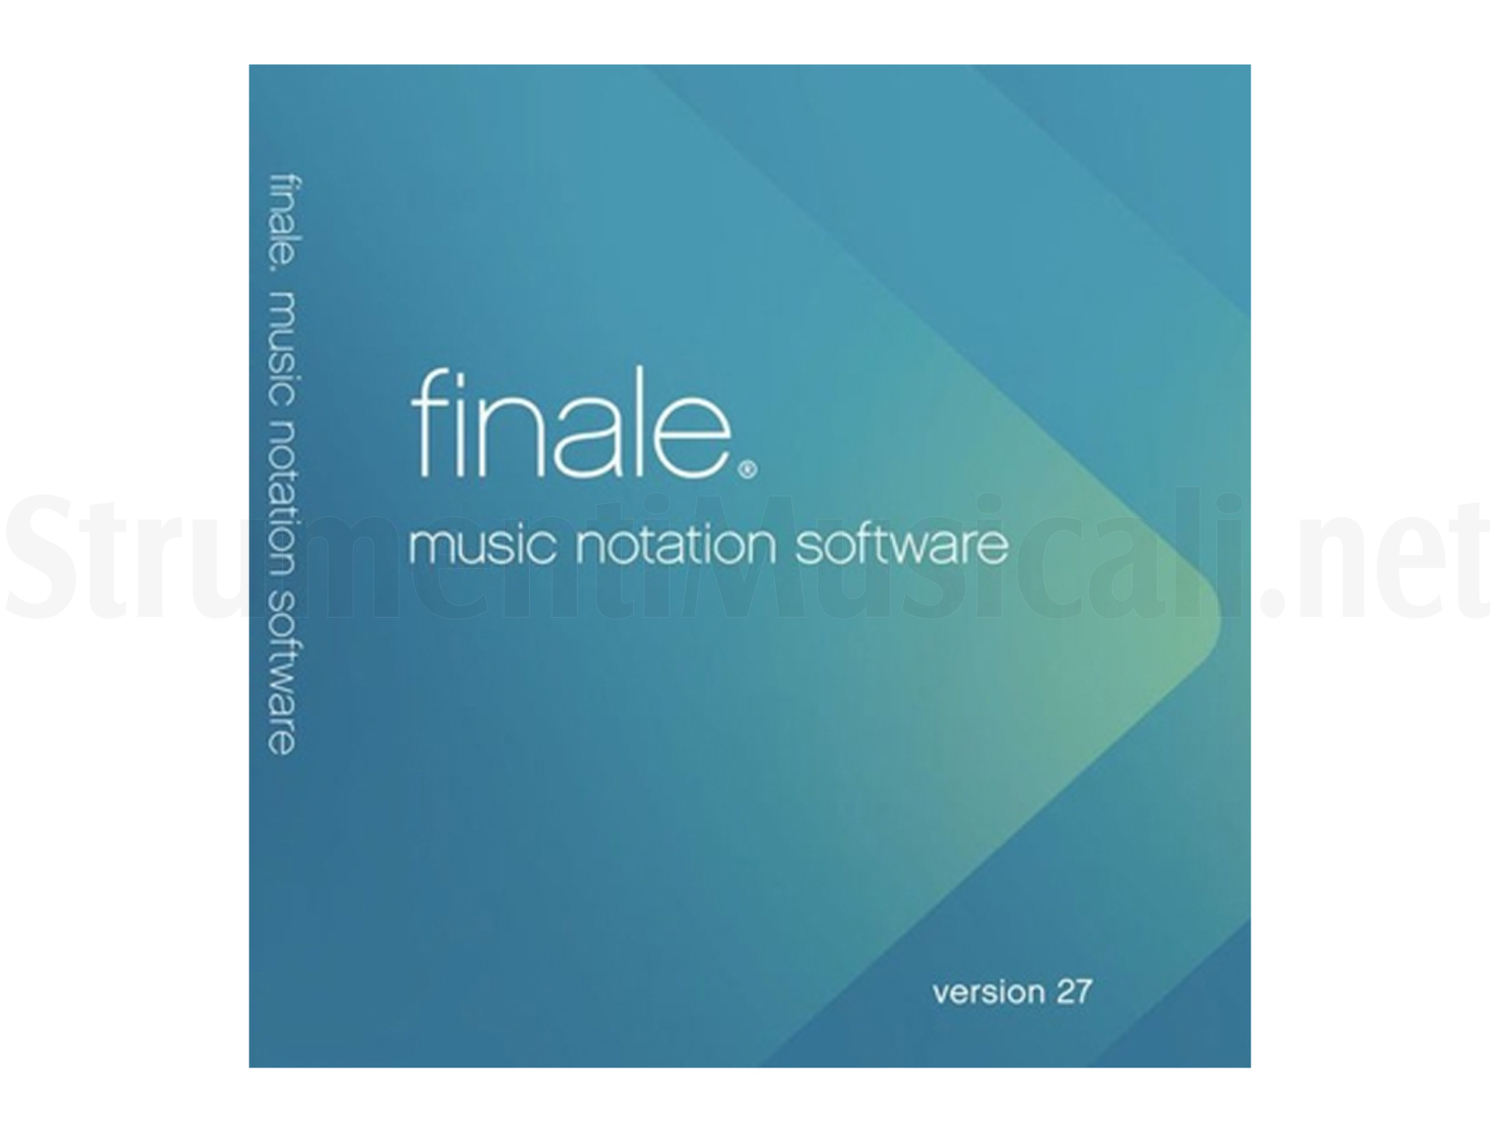 download the last version for ios MakeMusic Finale 27.4.0.108